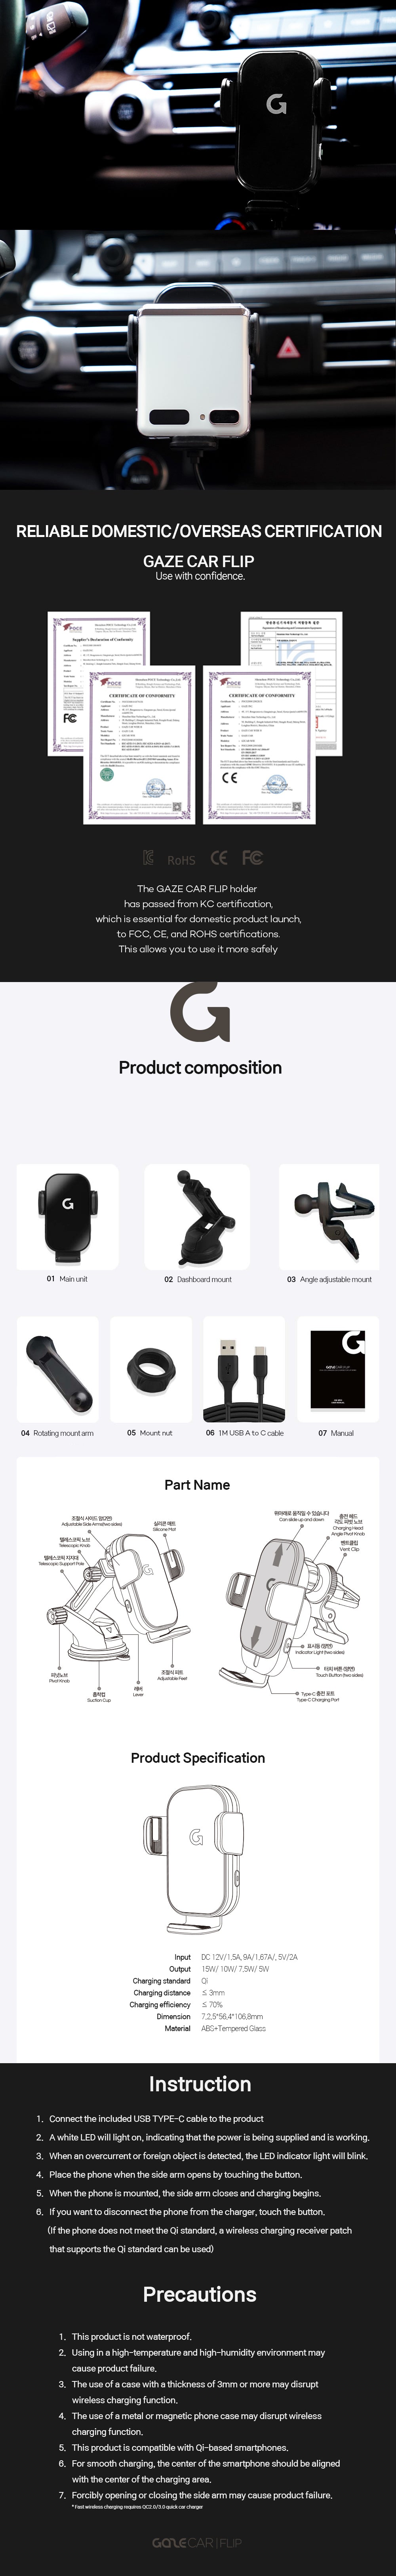 Gaze Car Flip wireless car charger has passed various certification process such as KC, FCC, CE, and ROHS for users to use it easily and safely without worry